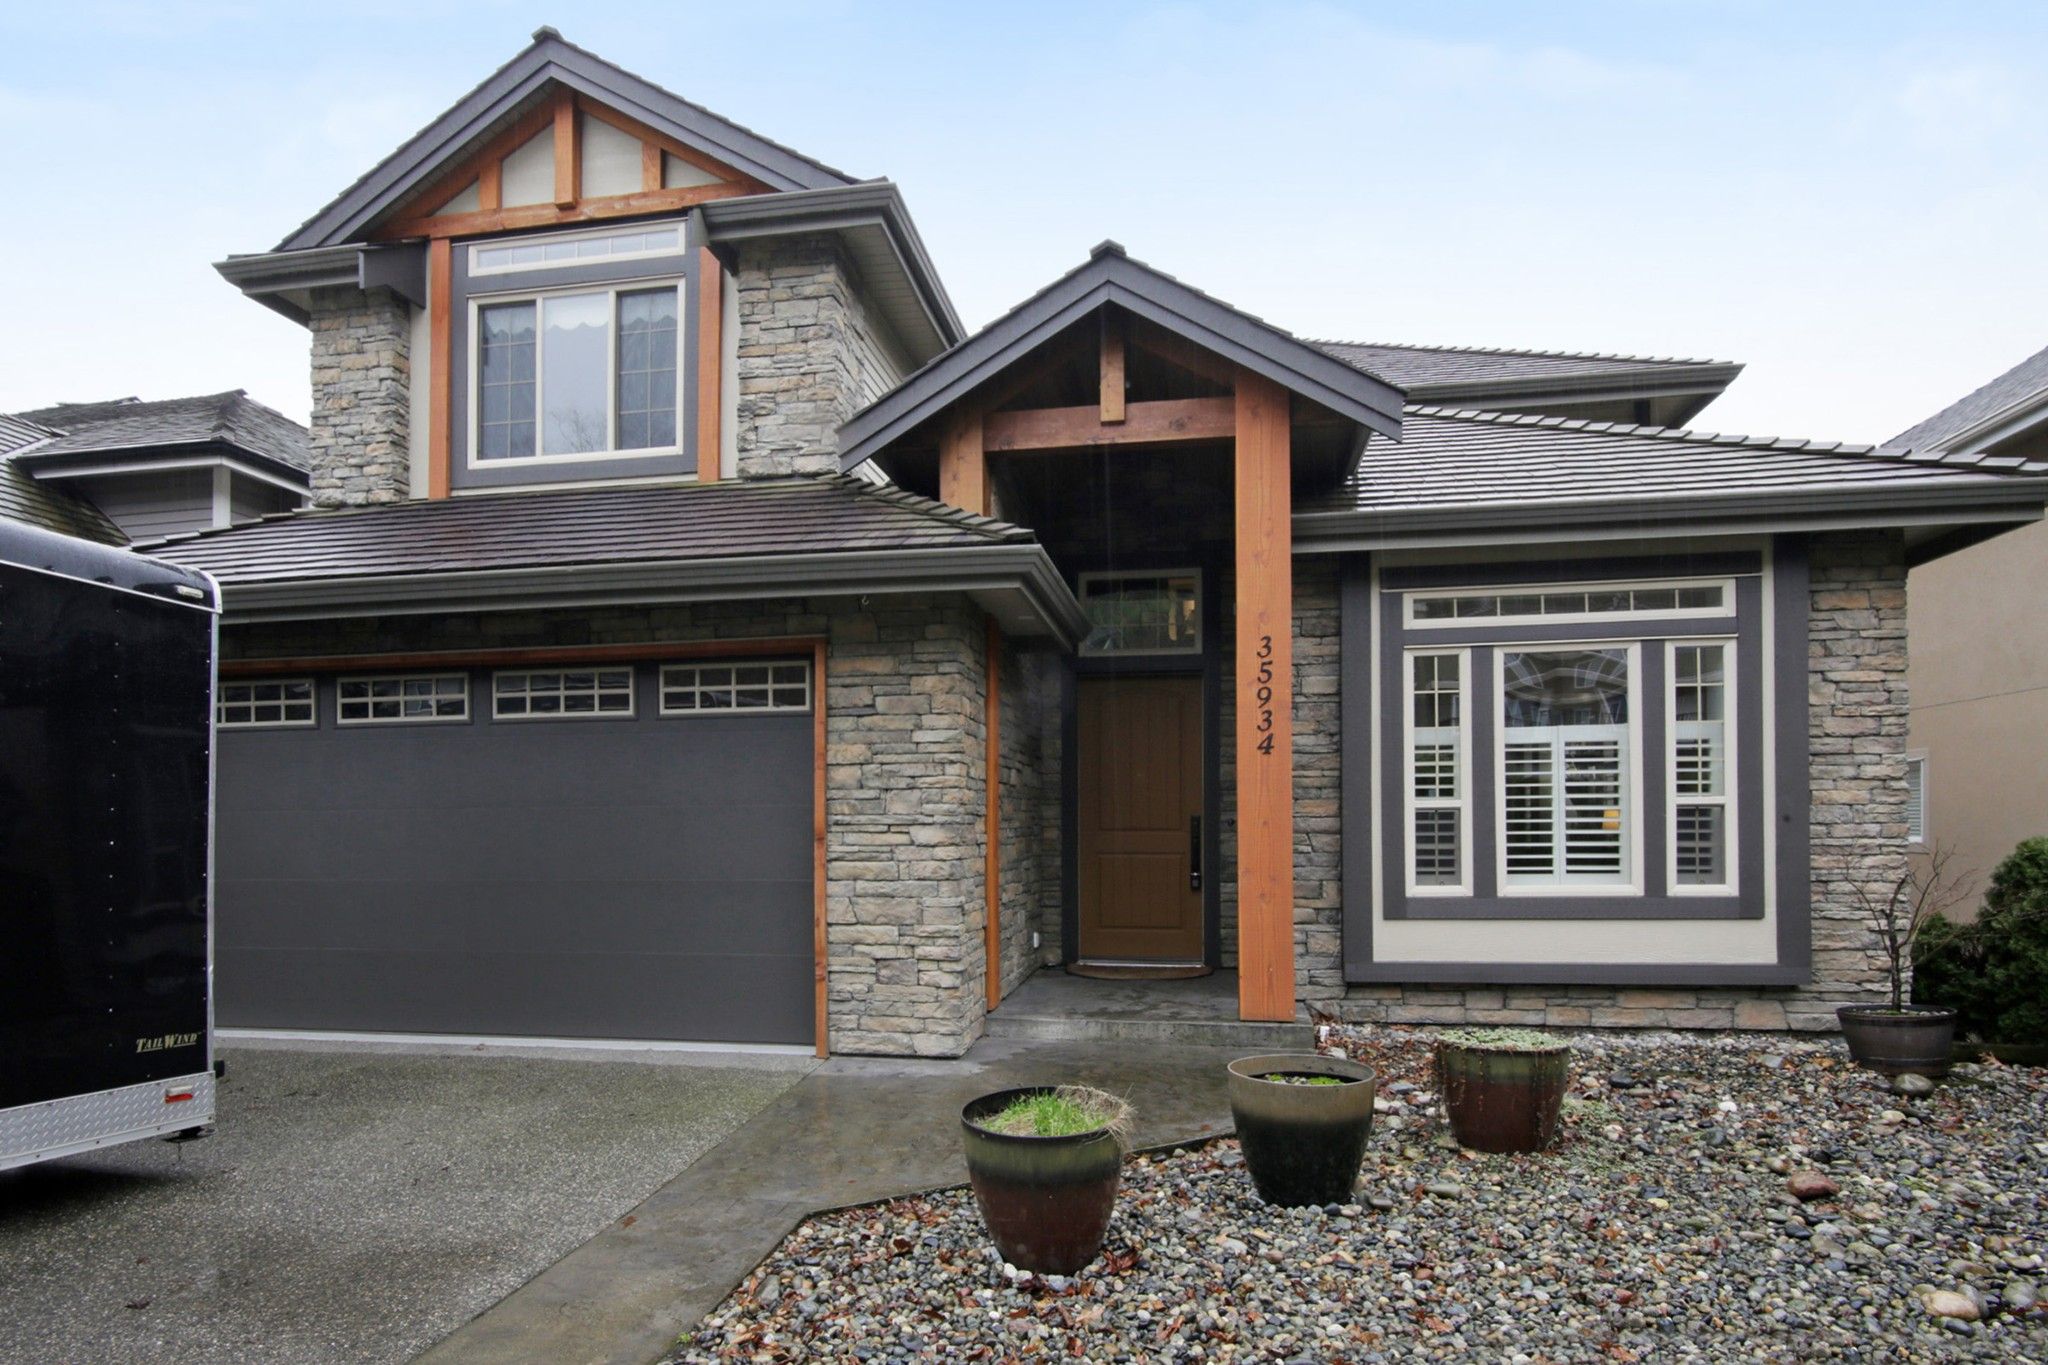 Main Photo: 35934 REGAL Parkway in Abbotsford: Abbotsford East House for sale : MLS®# R2235544